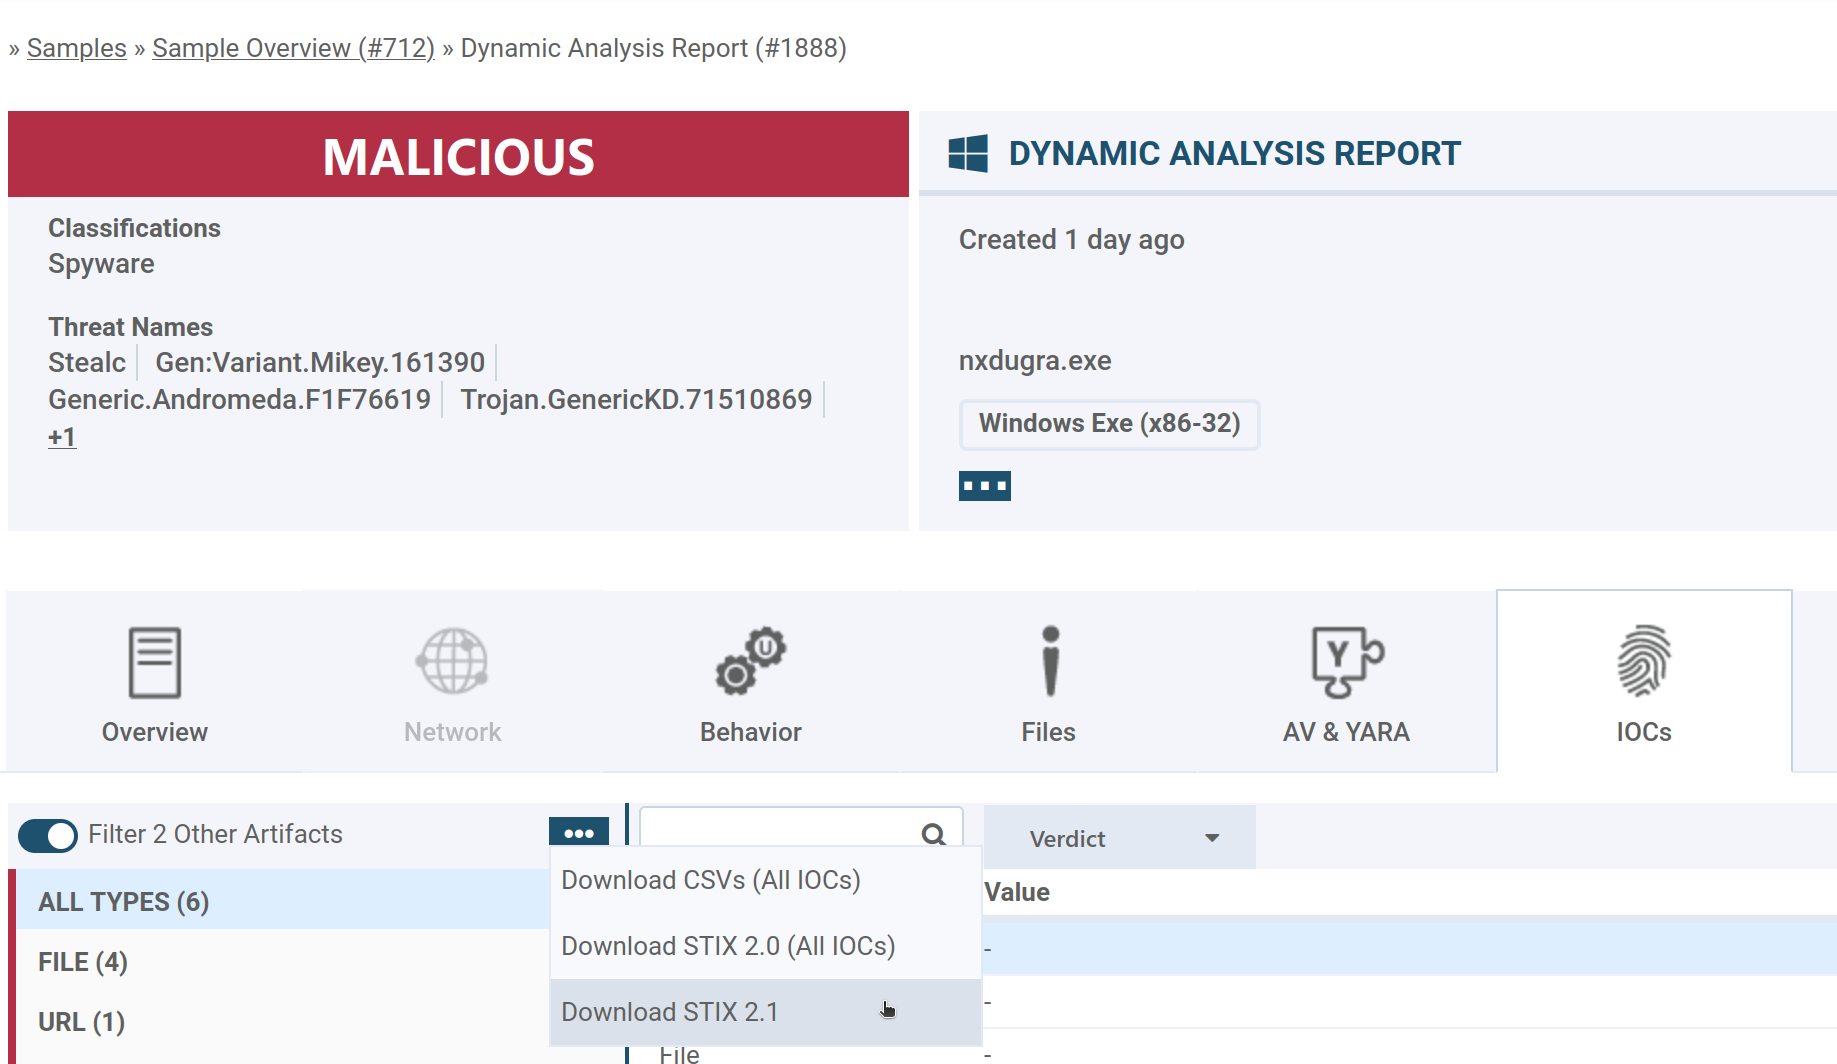 Alternatively, the STIX 2.1 report can also be downloaded from the "IOC" tab.